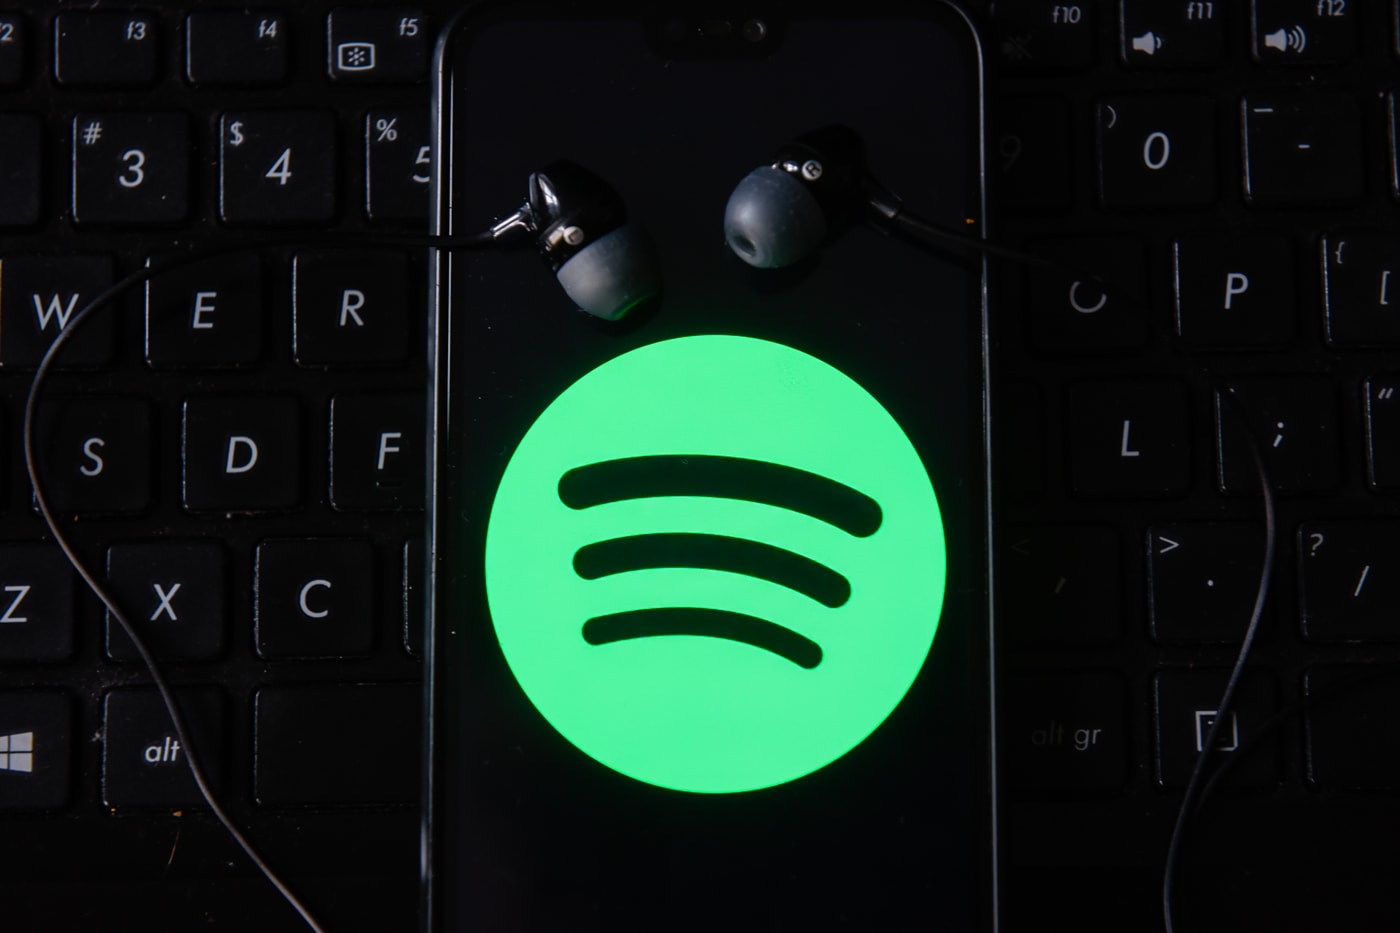 apple-music-spotify-app-store-controversy-response